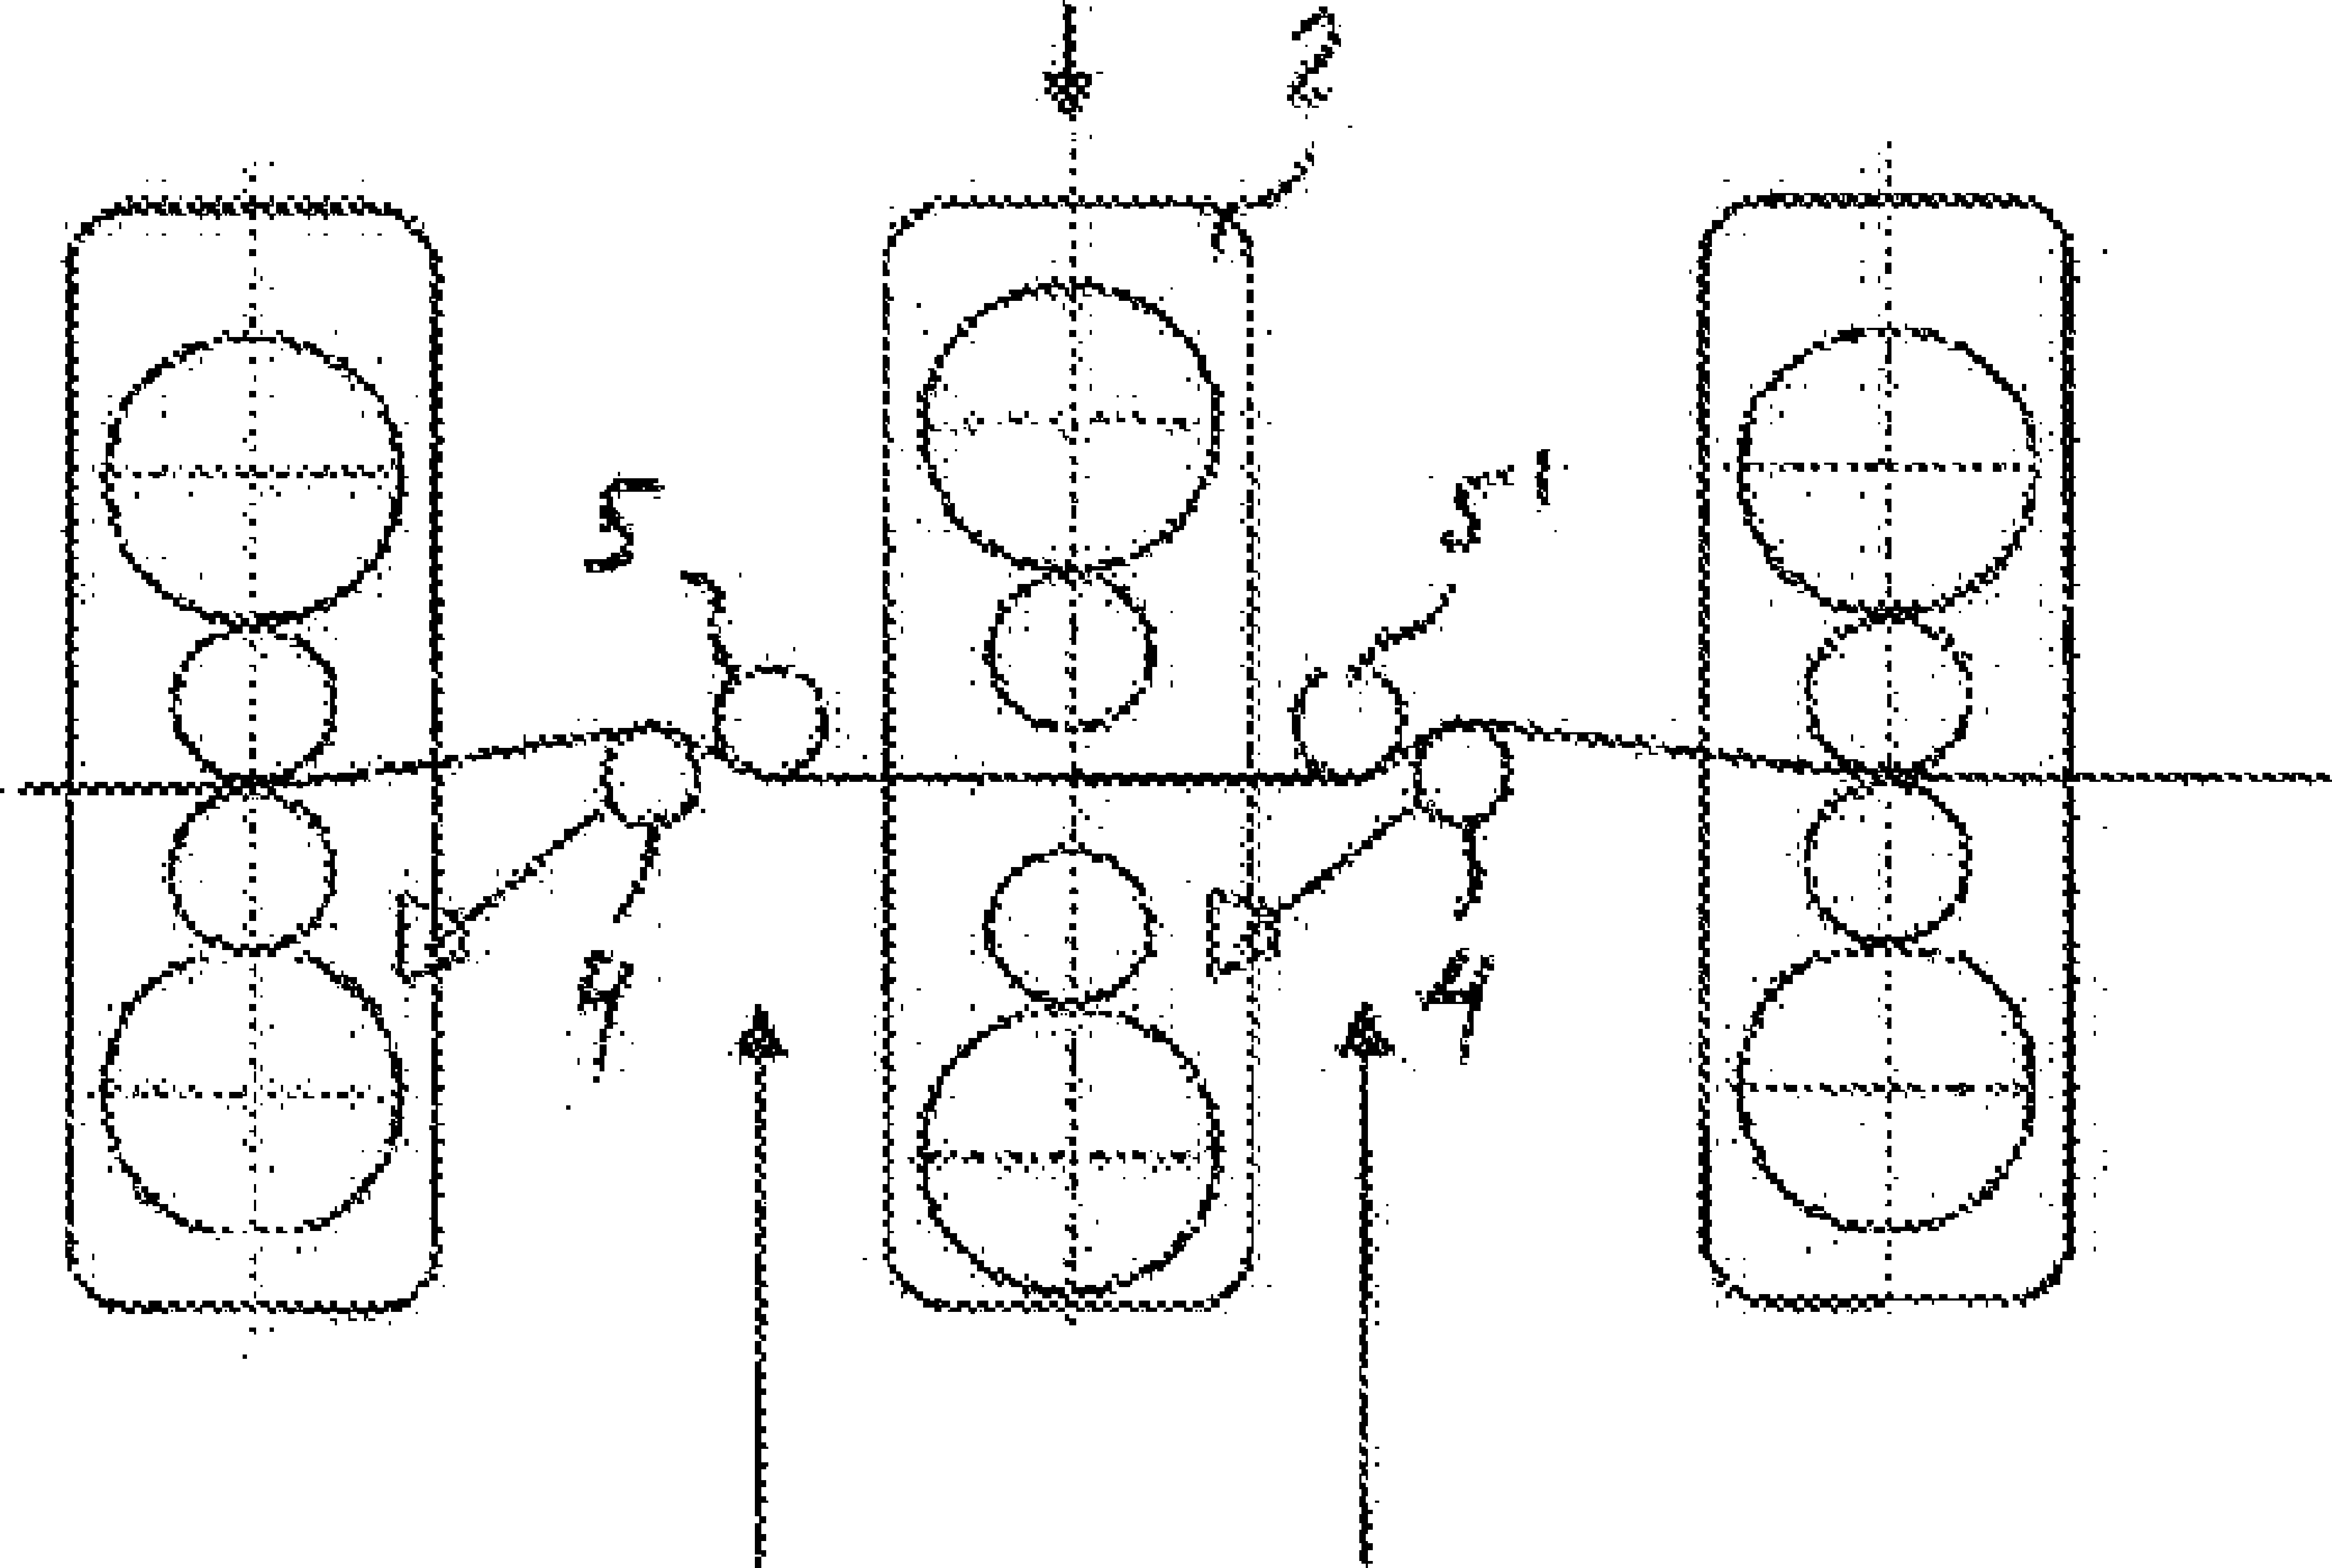 Method for the flying changing of working rolls in continuous casting and rolling installations and hot strip rolling mills using a hold-down roller